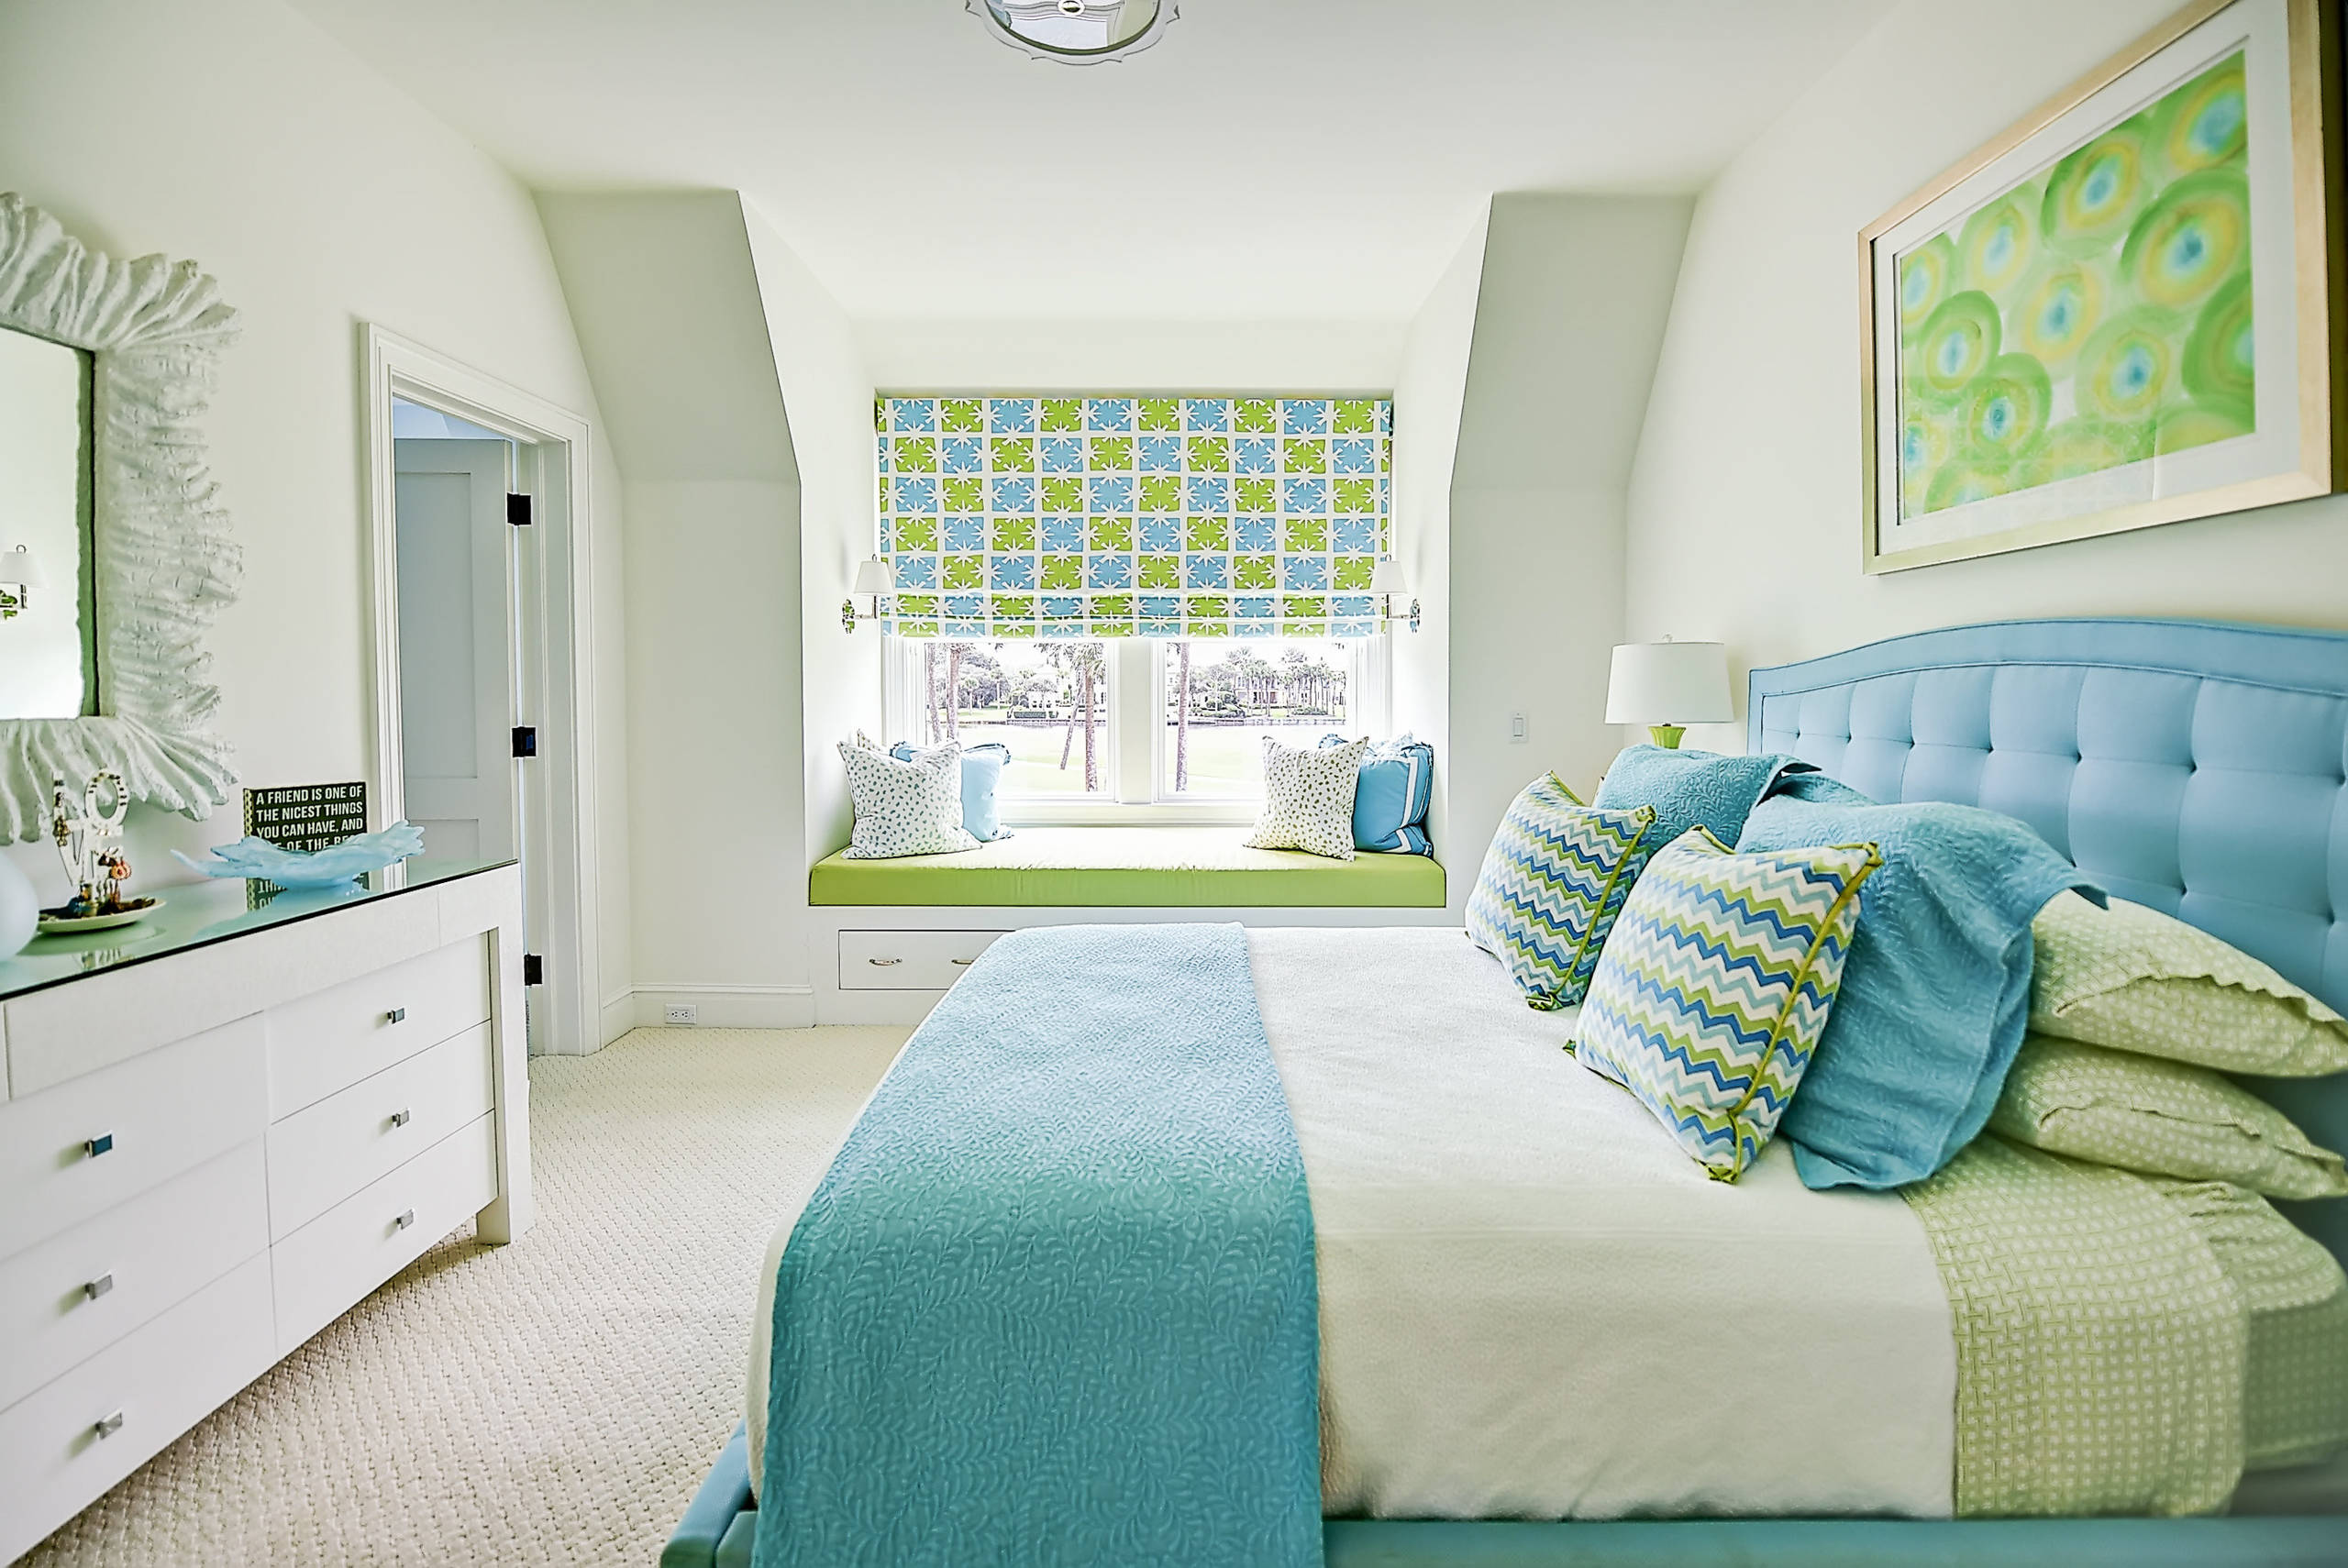 Blue And Green Bedroom - Photos & Ideas | Houzz